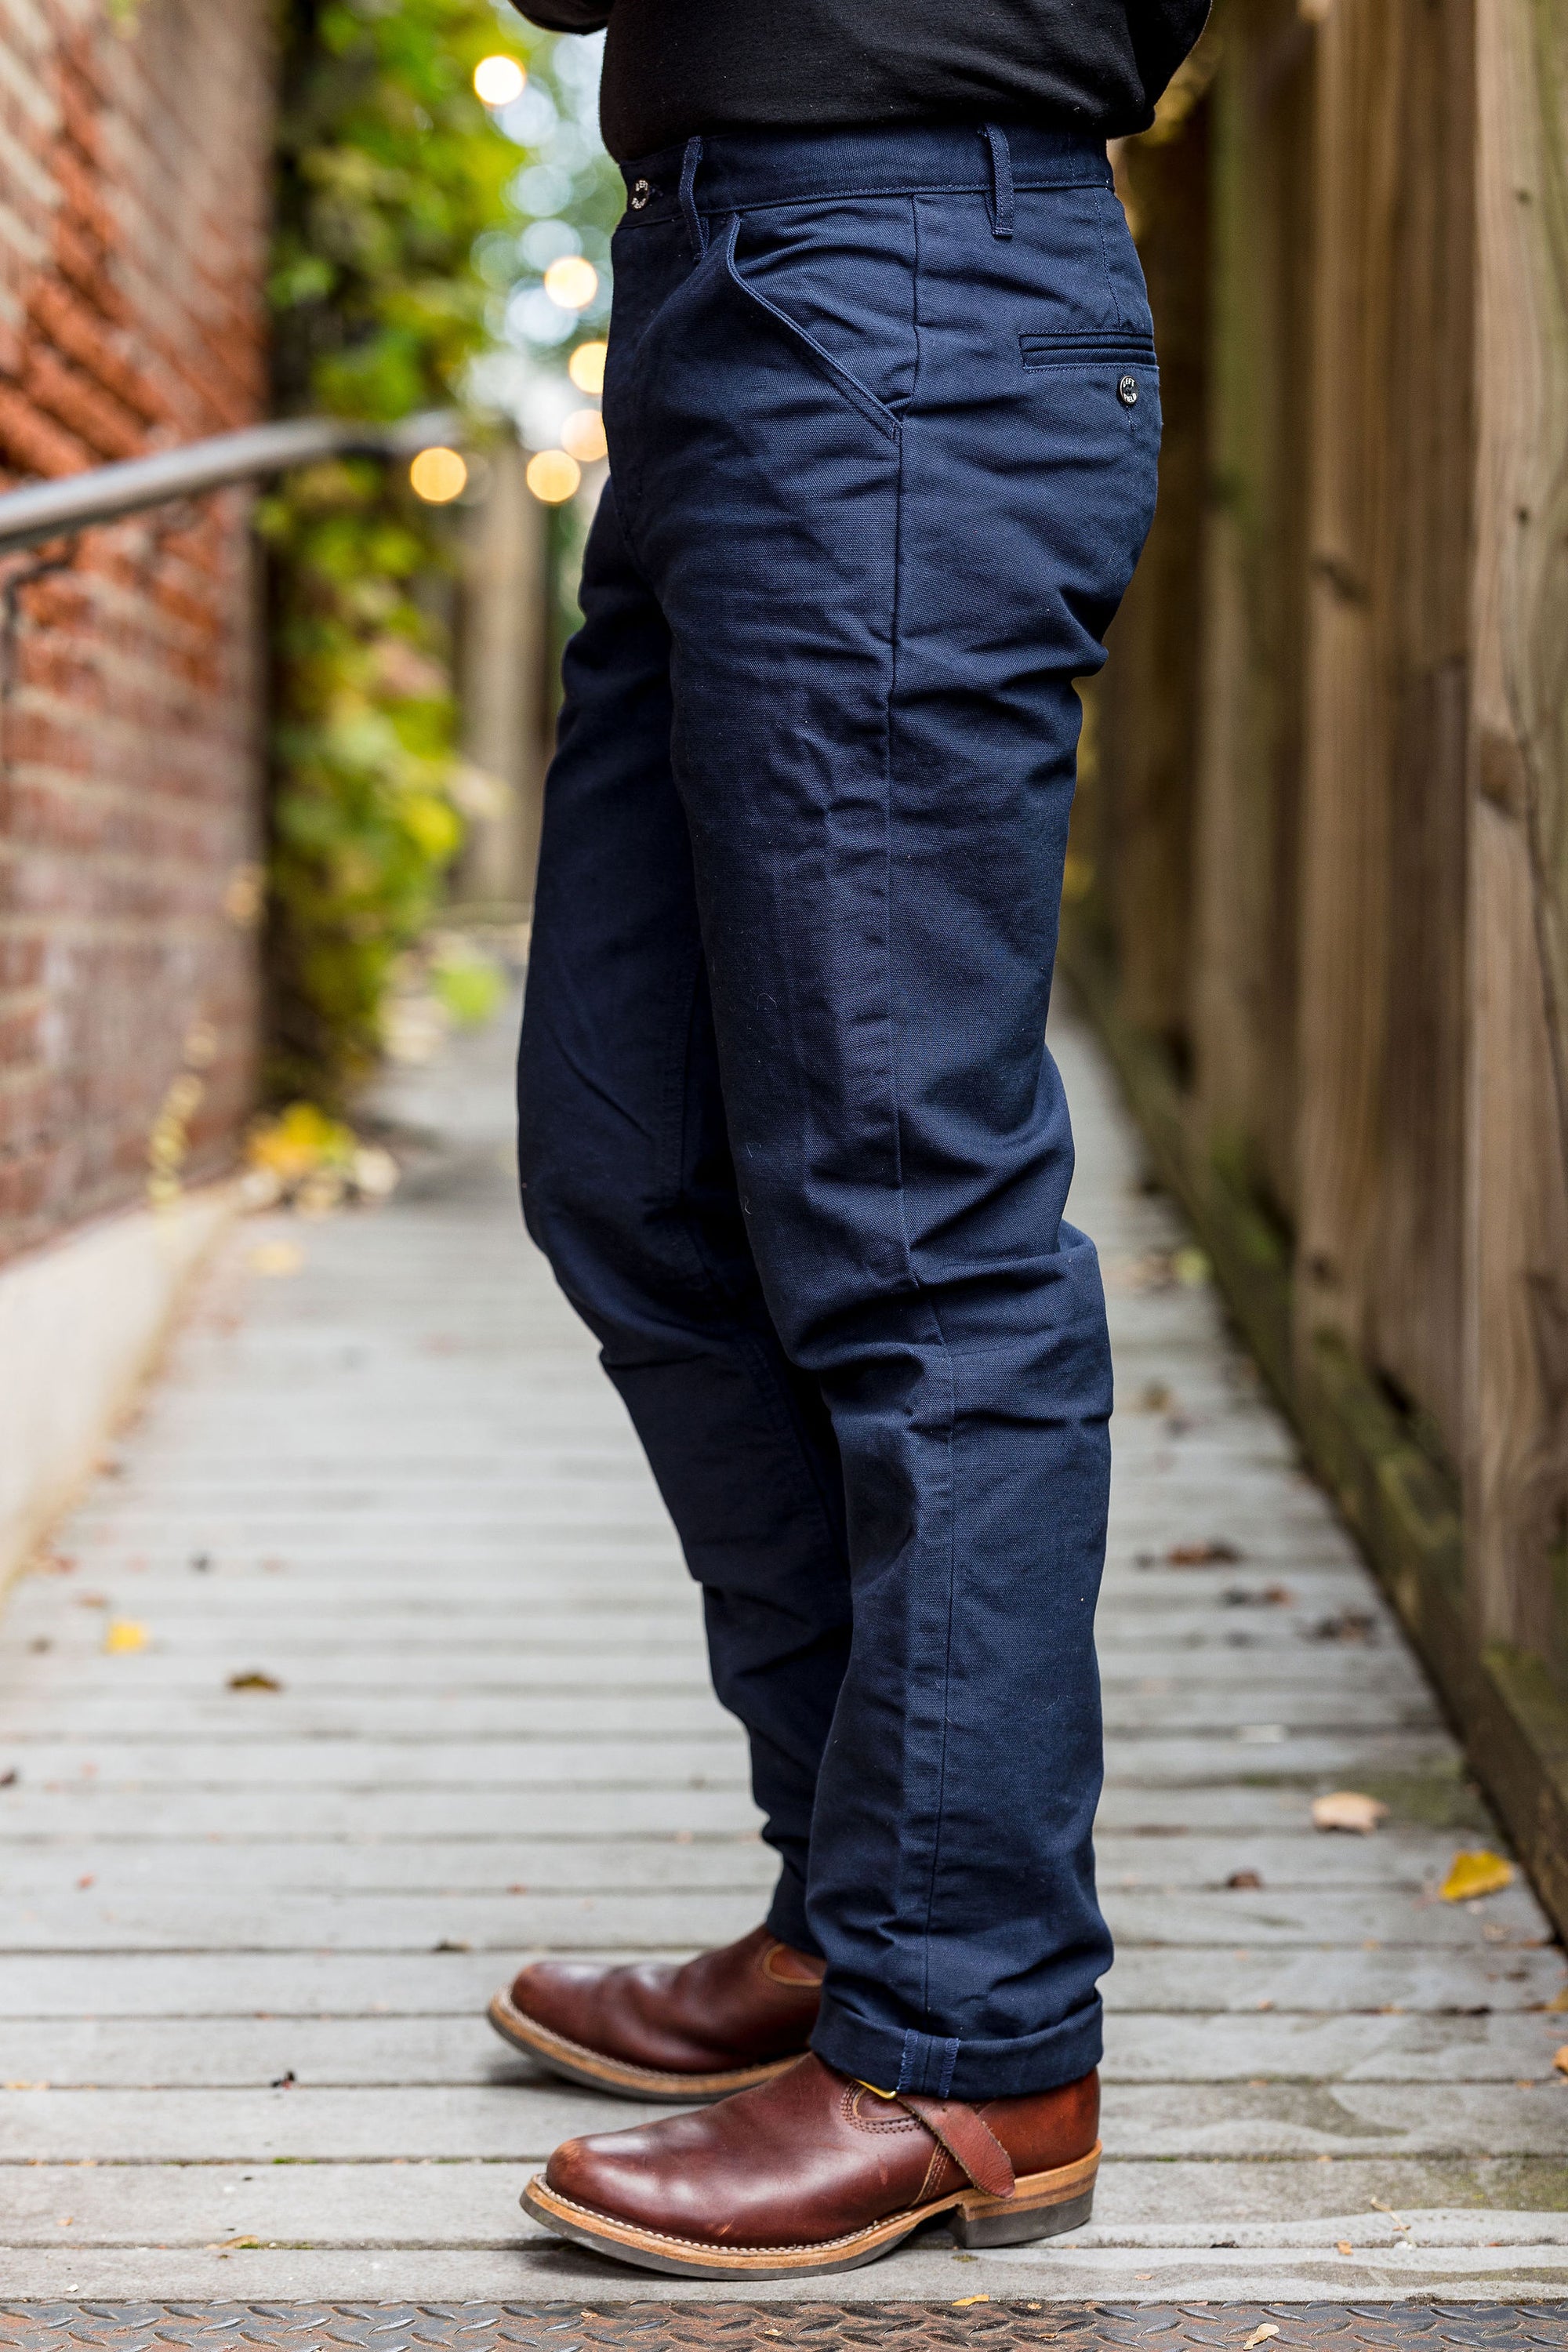 Dark Navy Blue Chinos : Made To Measure Custom Jeans For Men & Women,  MakeYourOwnJeans®